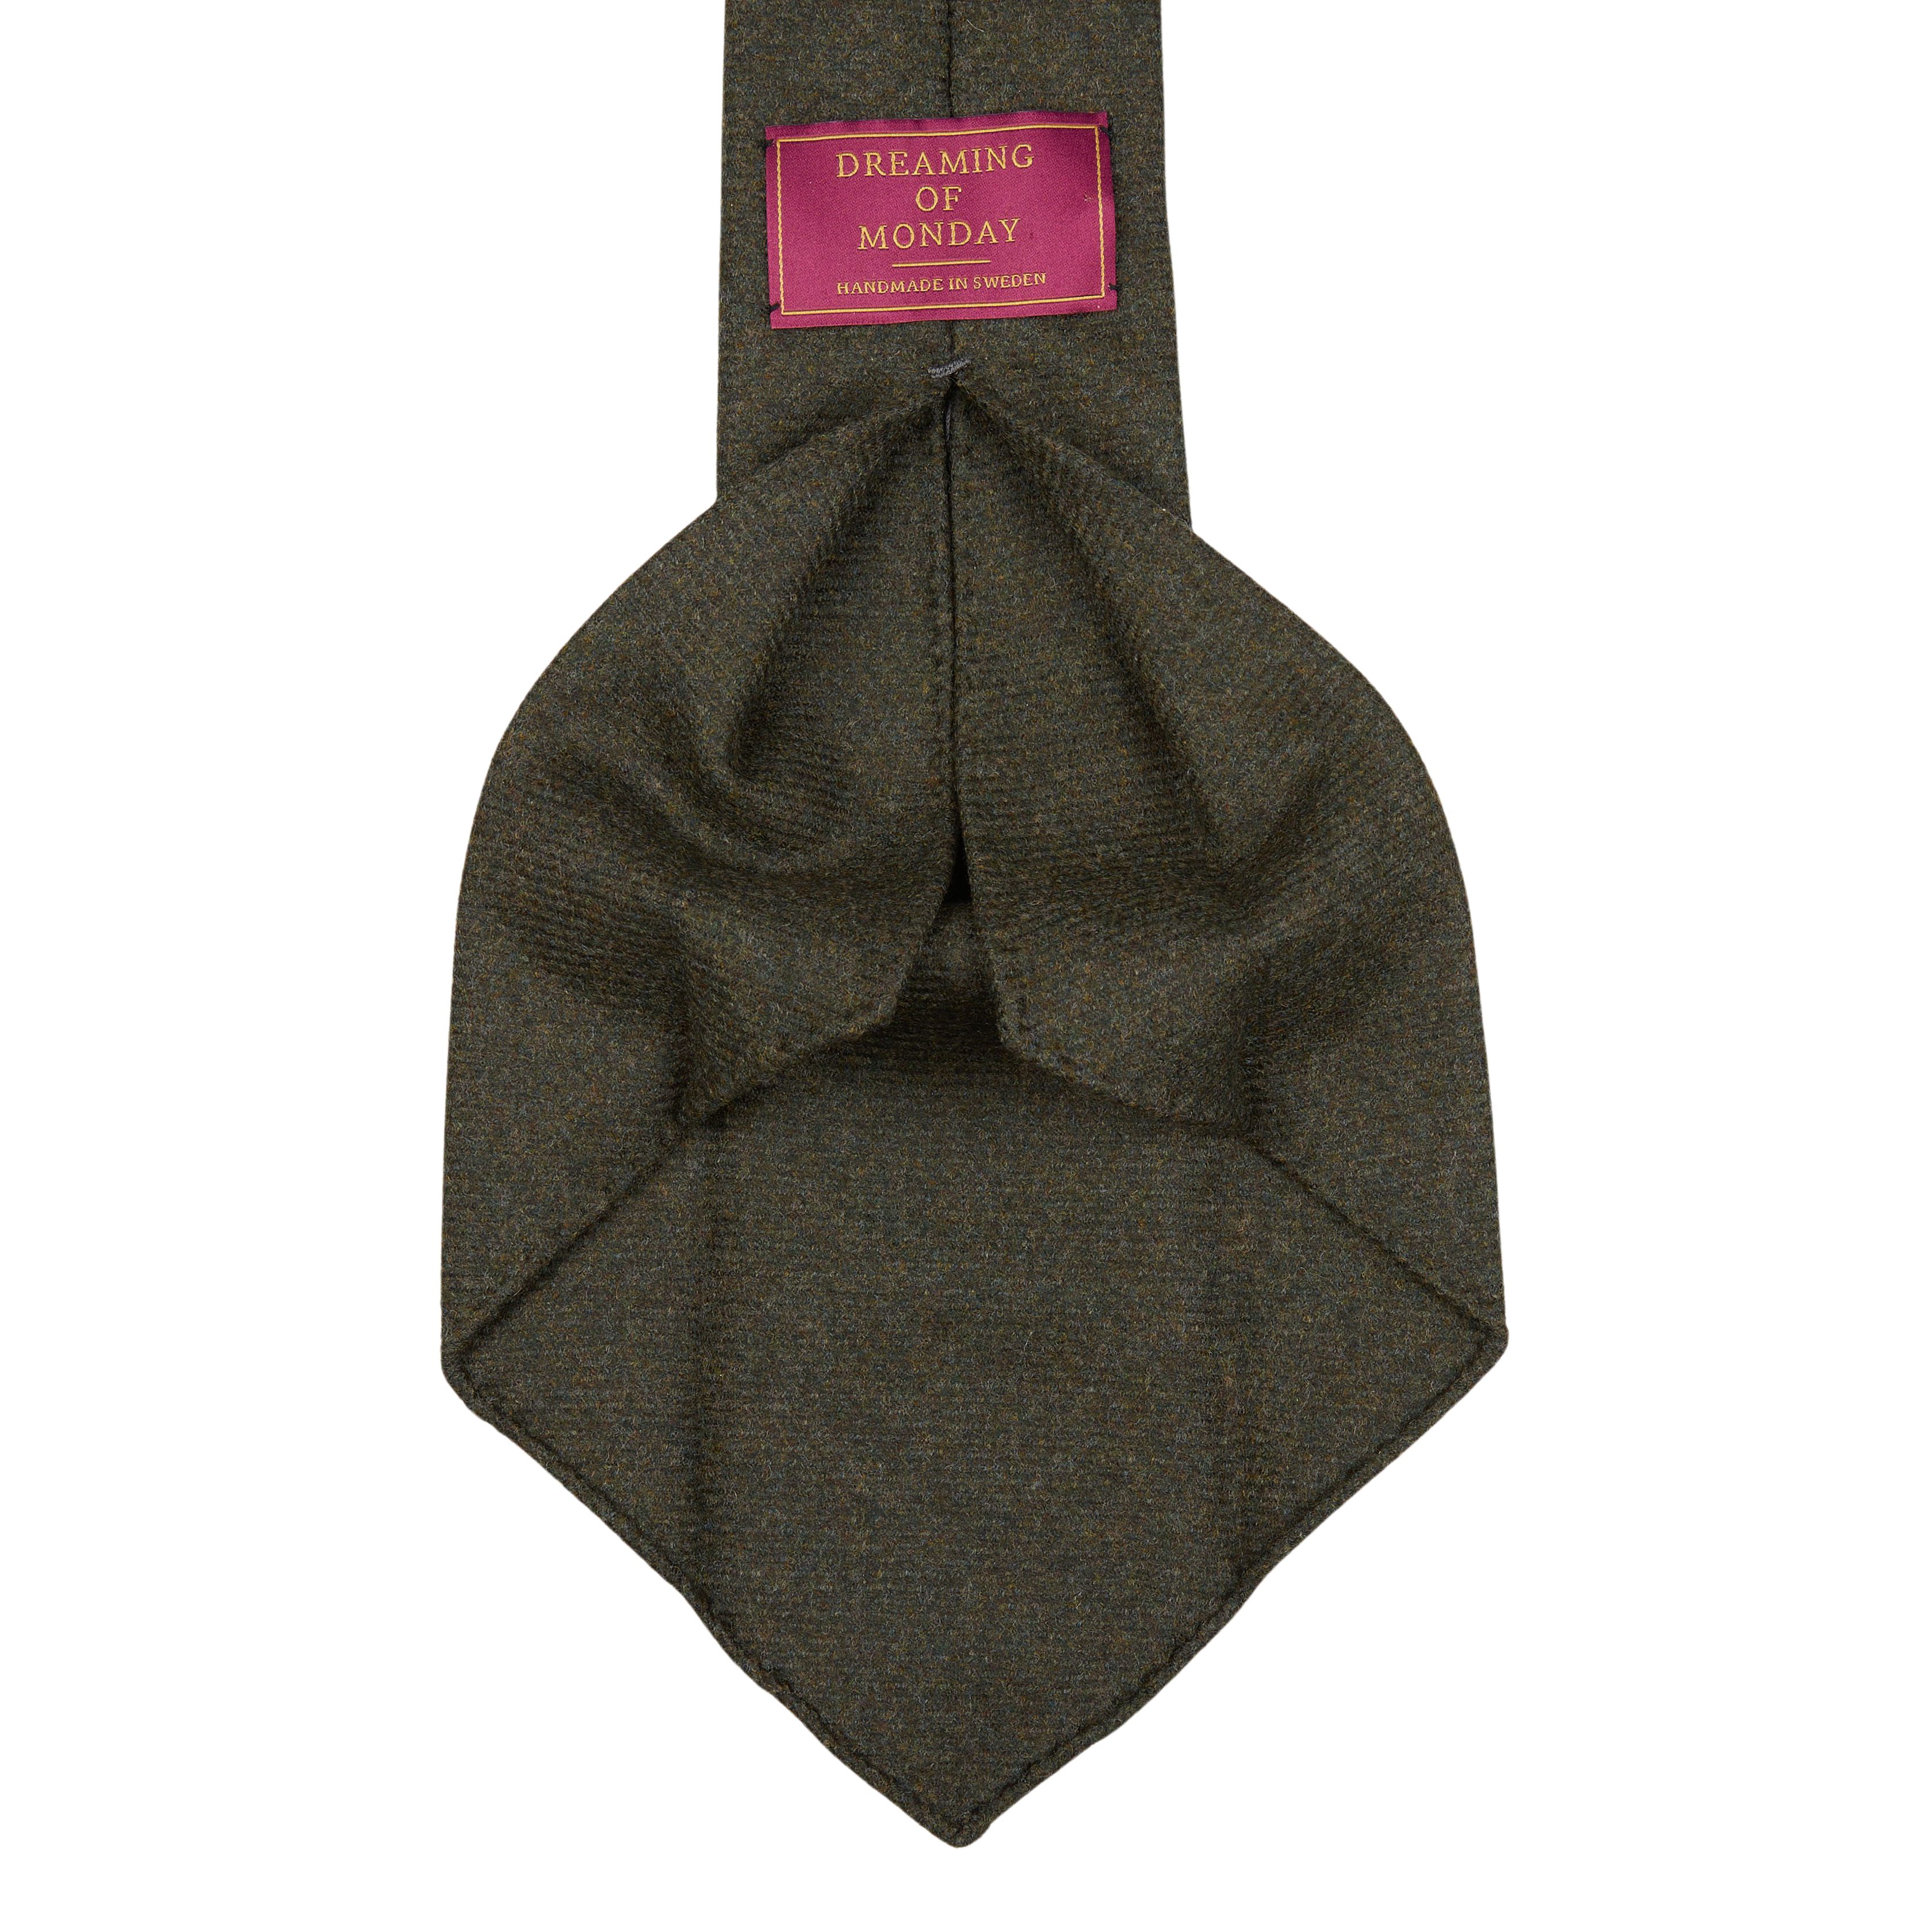 A green tweed necktie with a pink label, handmade with Moss Green Loro Piana Wool Cashmere fabric.